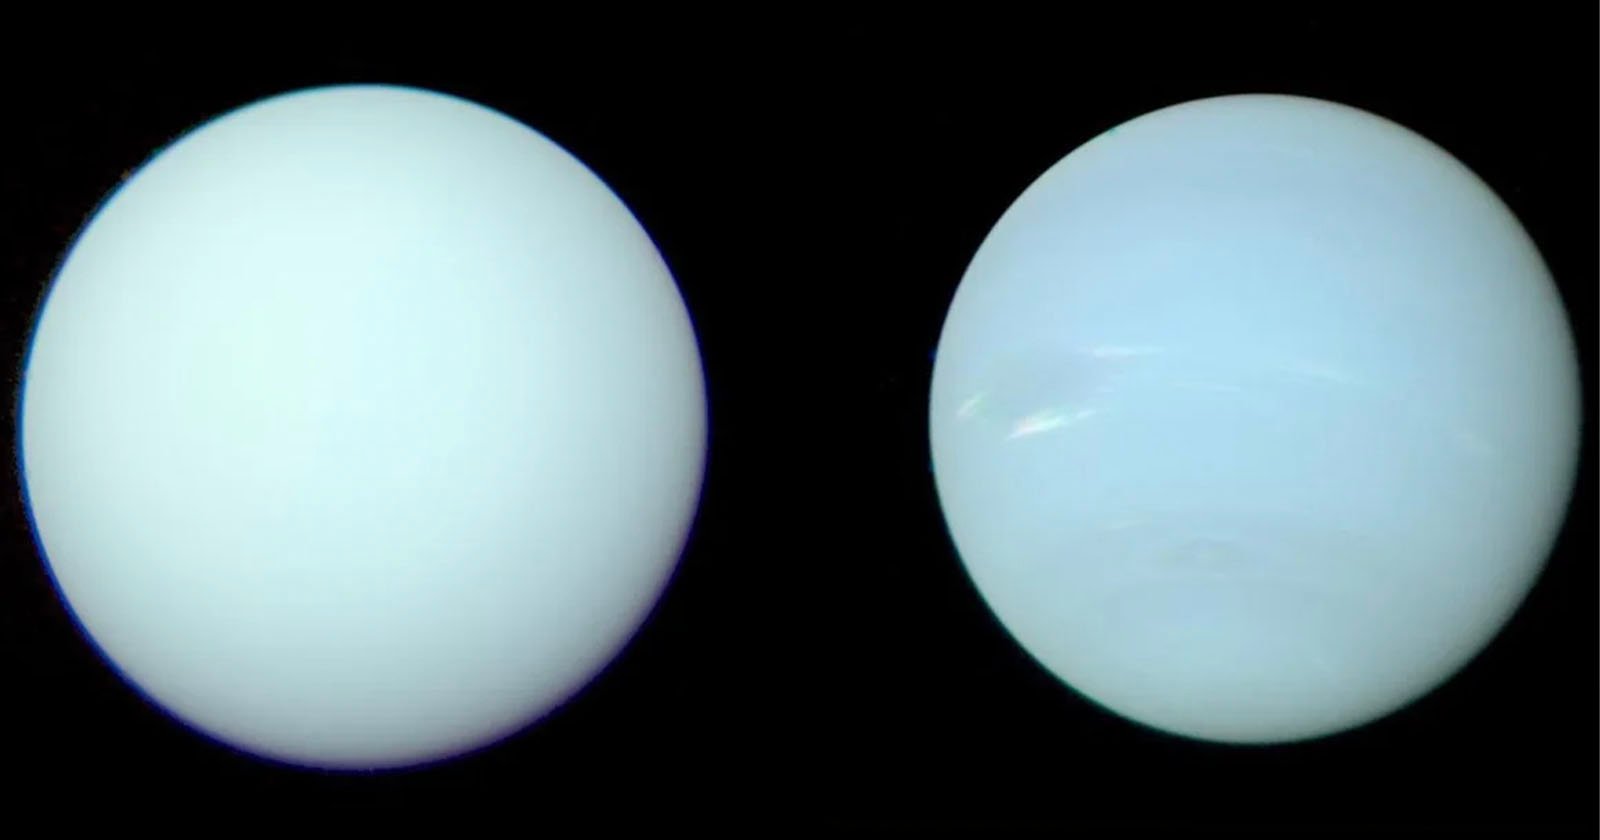 Weve Been Getting the Colors of Neptune and Uranus All Wrong